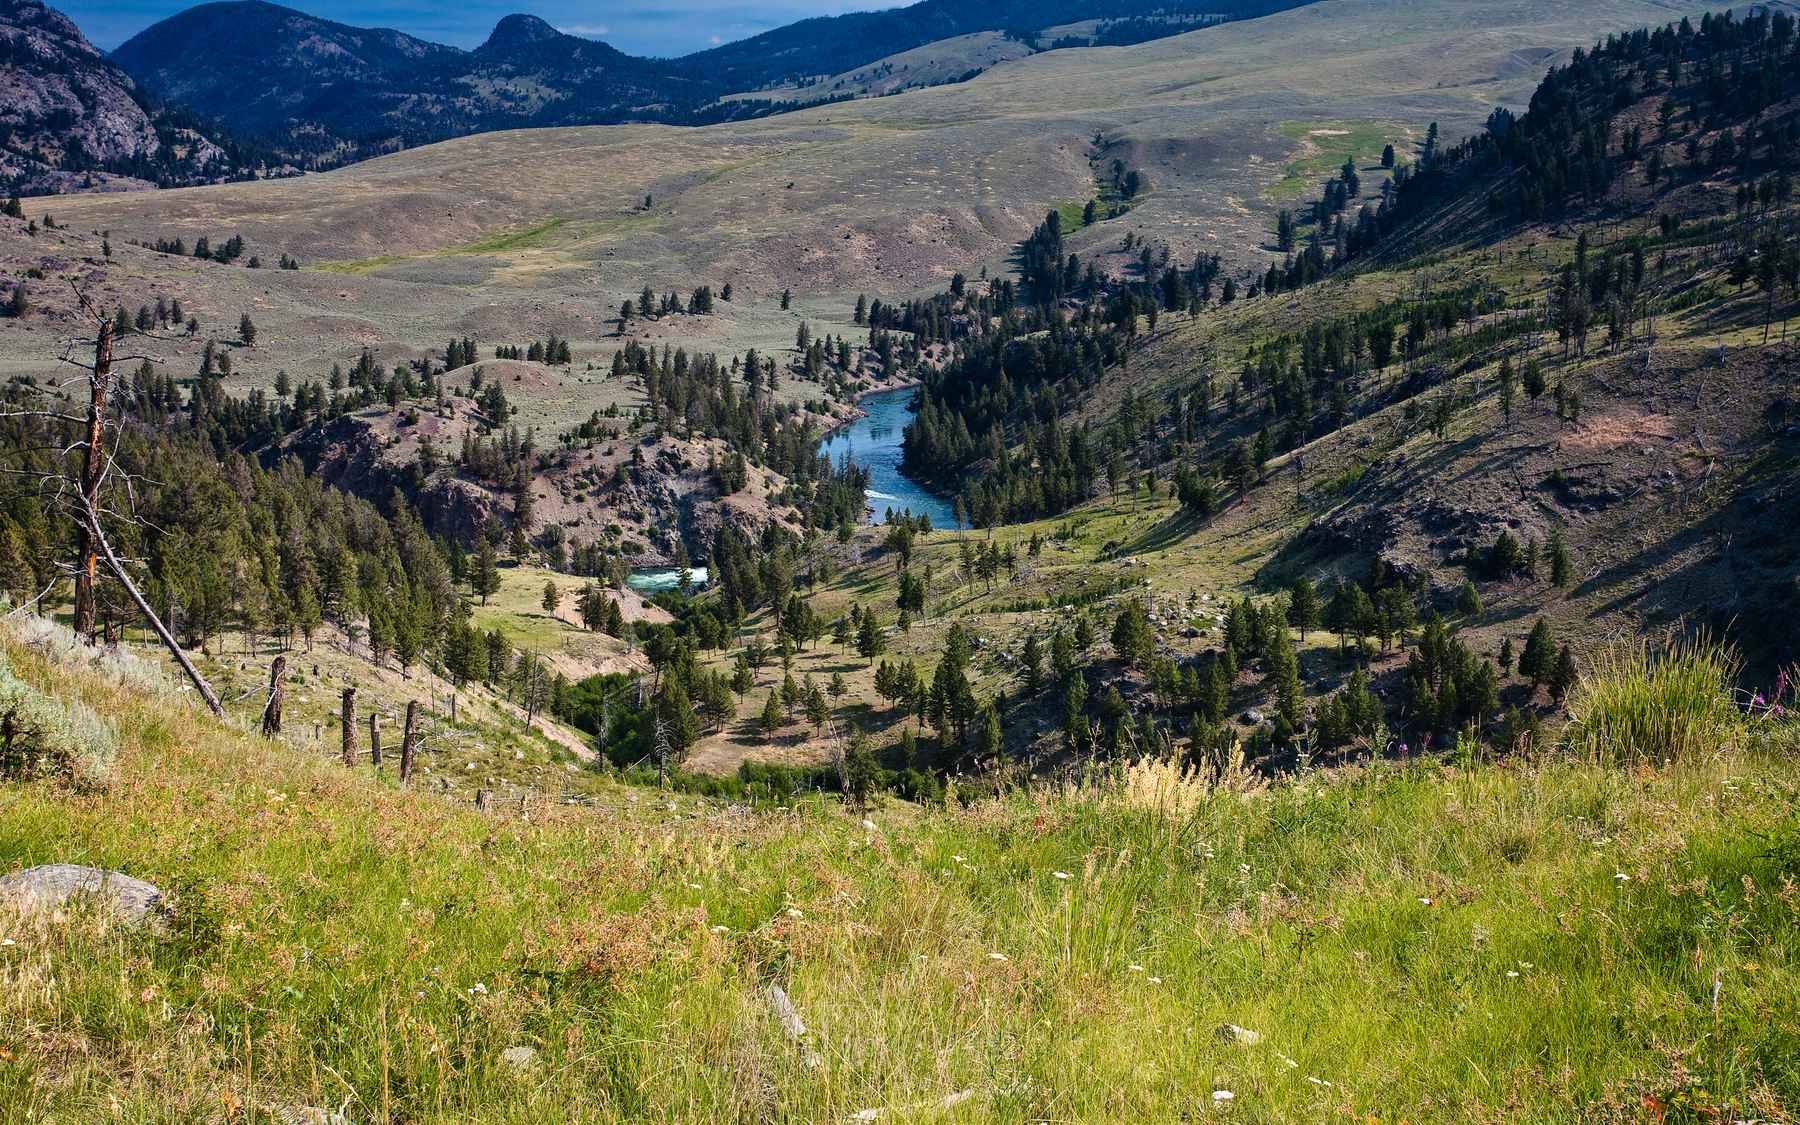 Yellowstone to reopen north loop July 2, increasing access for anglers | Hatch Magazine